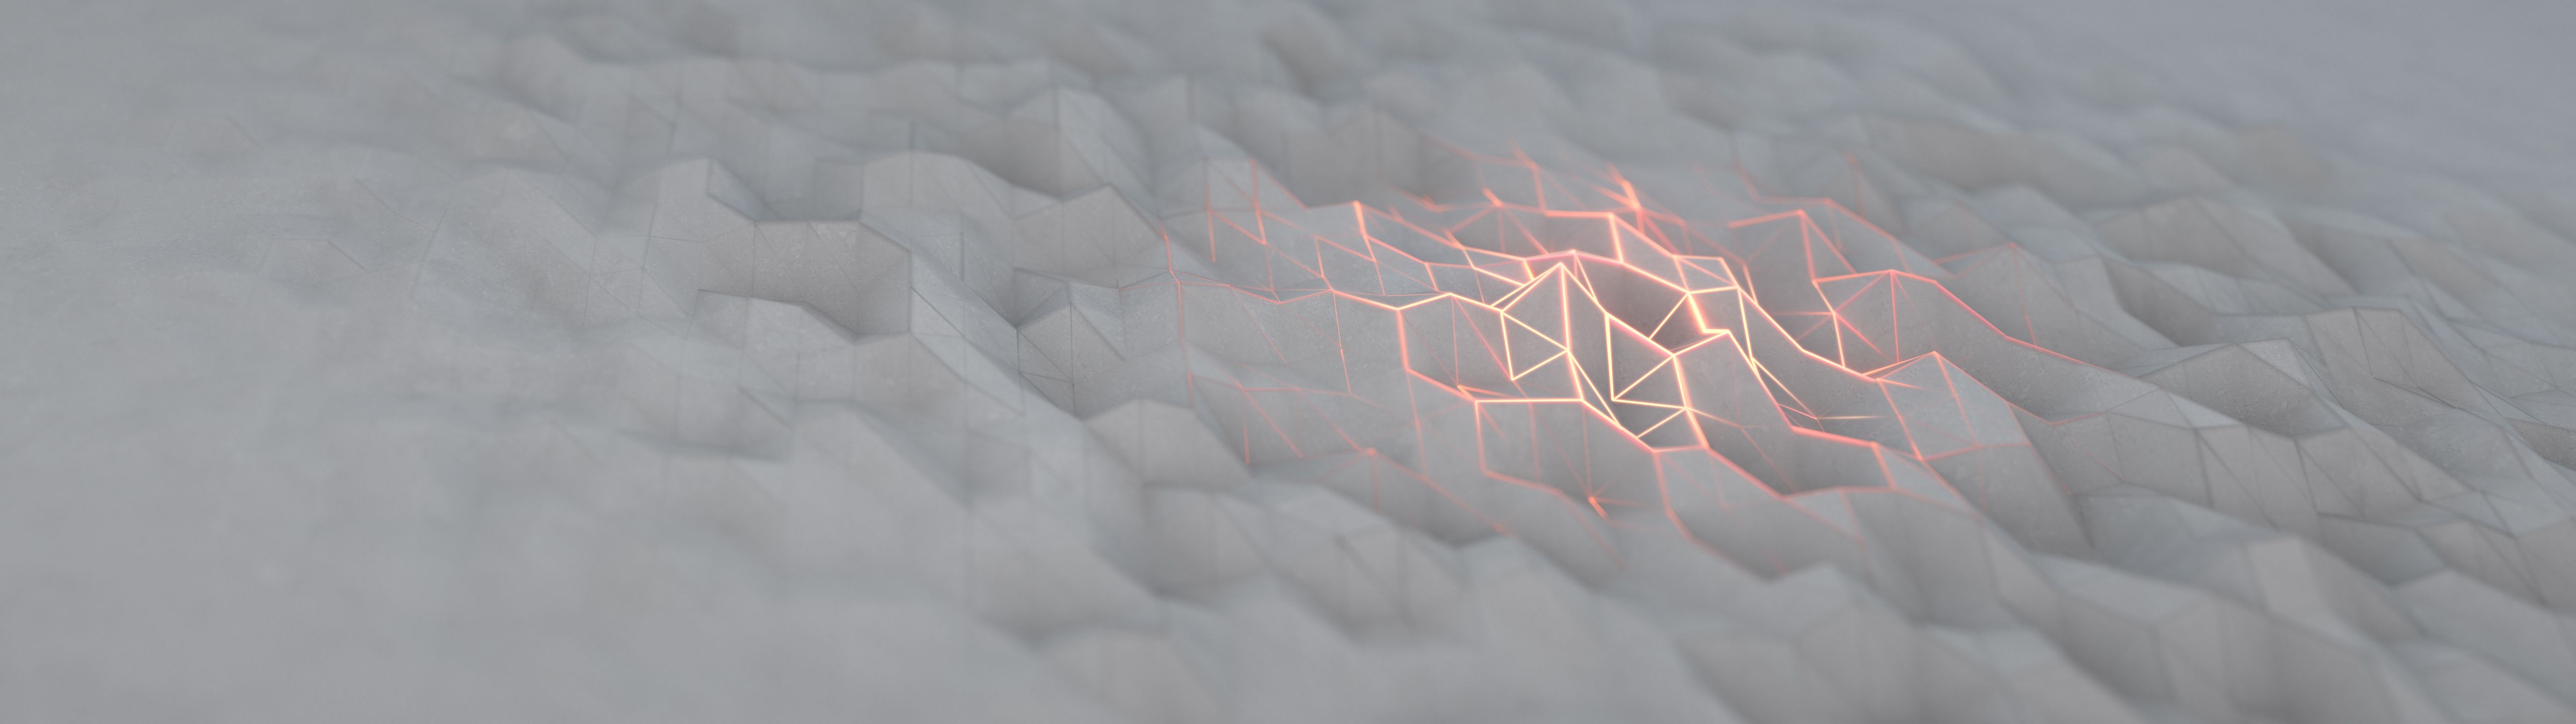 A close up of a wall of white honeycomb with a red neon light on the right side. - 5120x1440